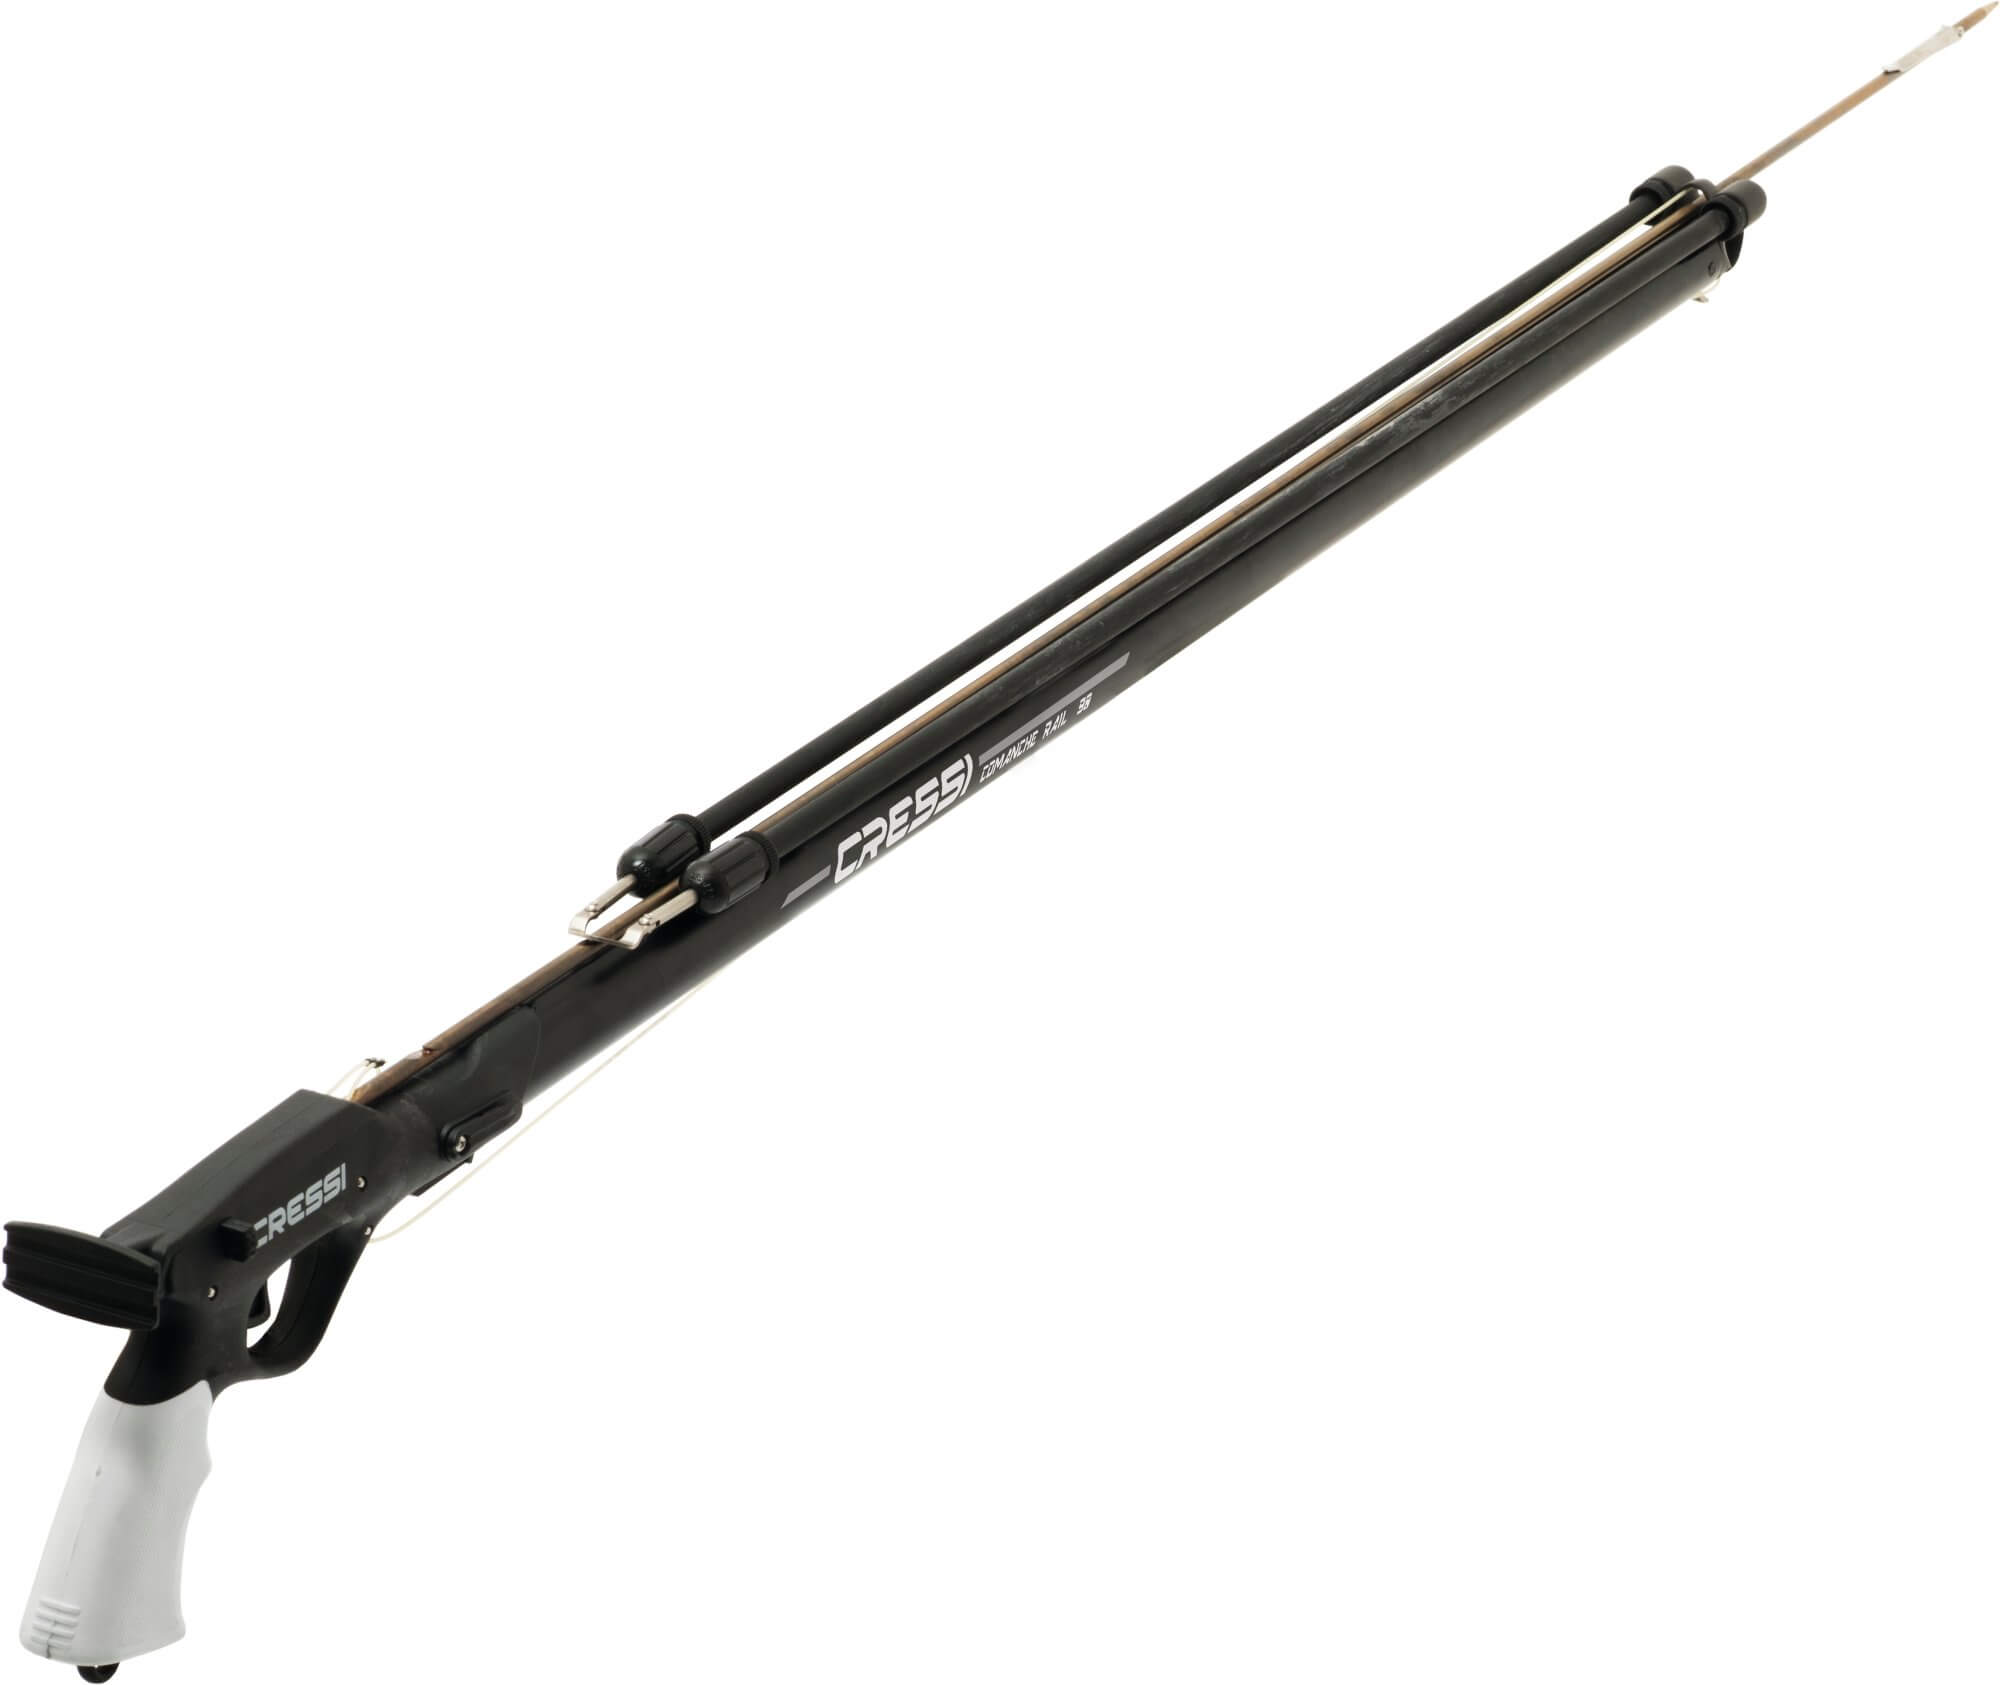 Question :How effective is the Cressi Souix 75cm with two 16mm bands ?(max  range i can target medium fish) : r/Spearfishing